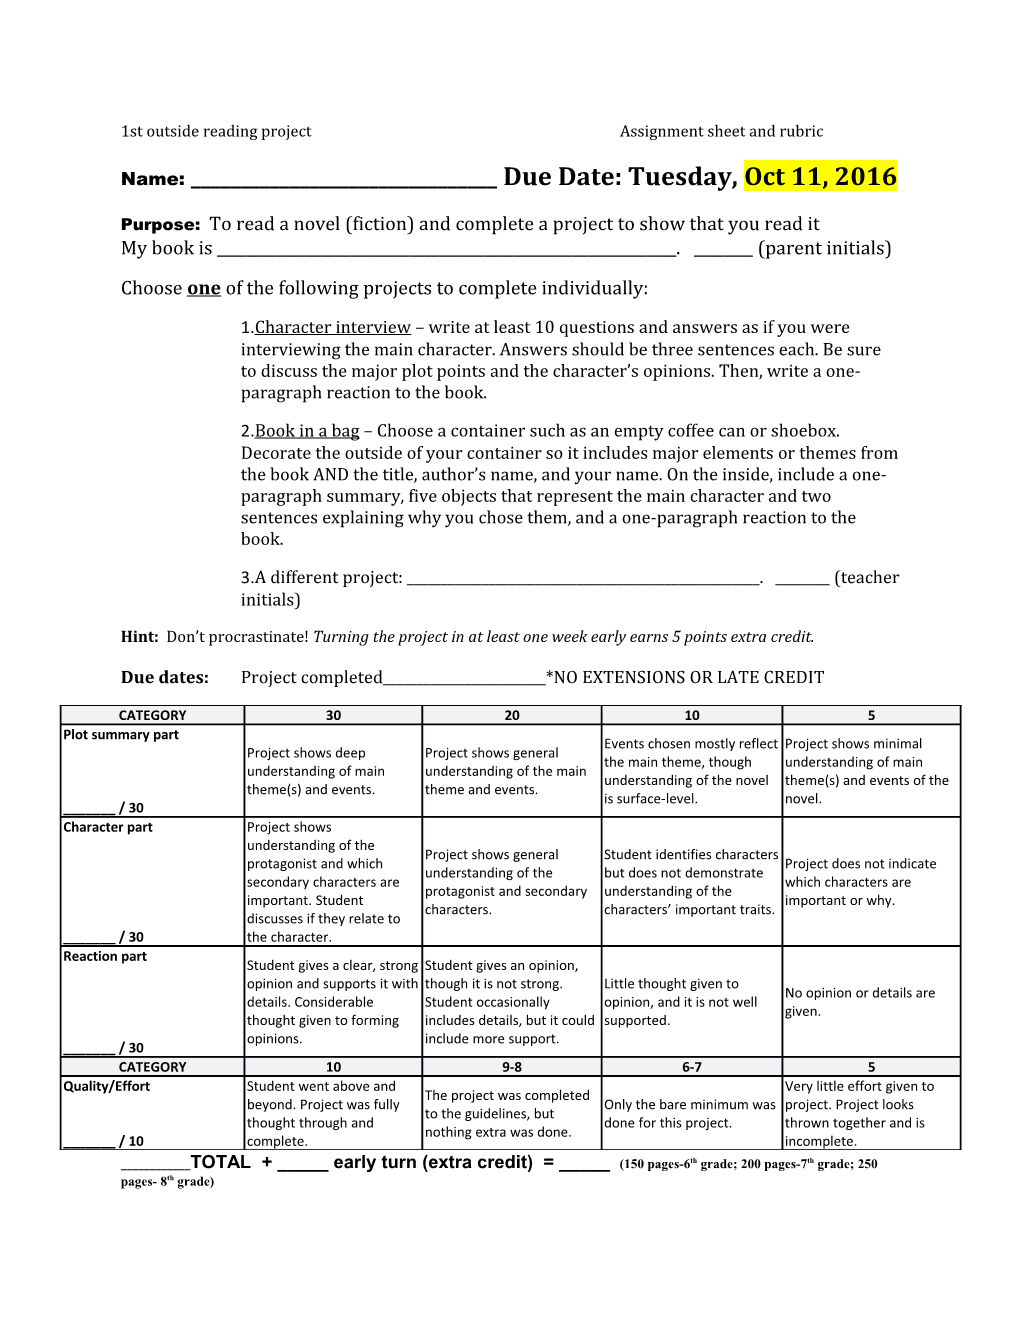 1St Outside Reading Project Assignment Sheet and Rubric